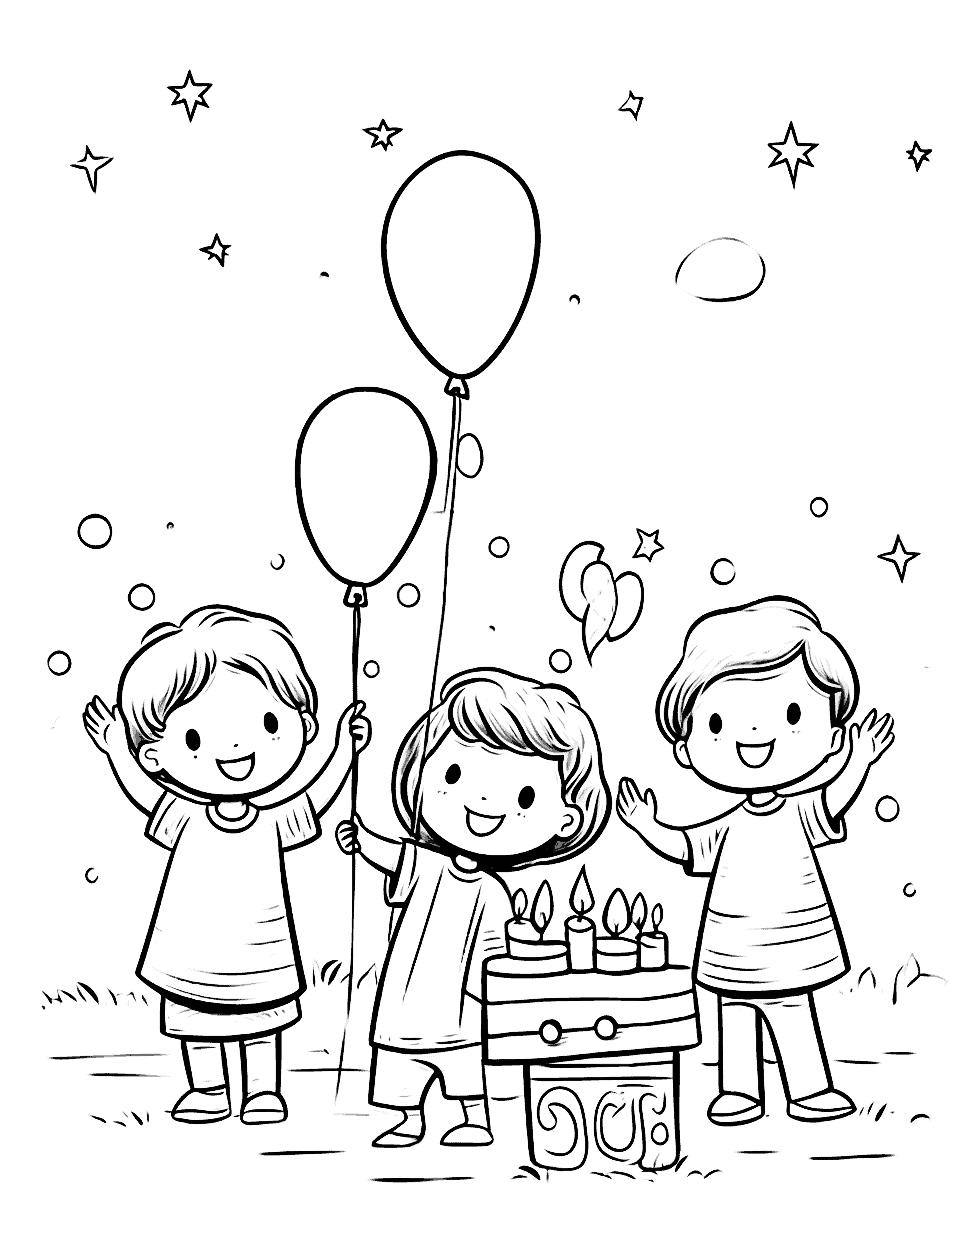 Sports Day Birthday Happy Coloring Page - A group of children celebrating a birthday while playing various sports games.